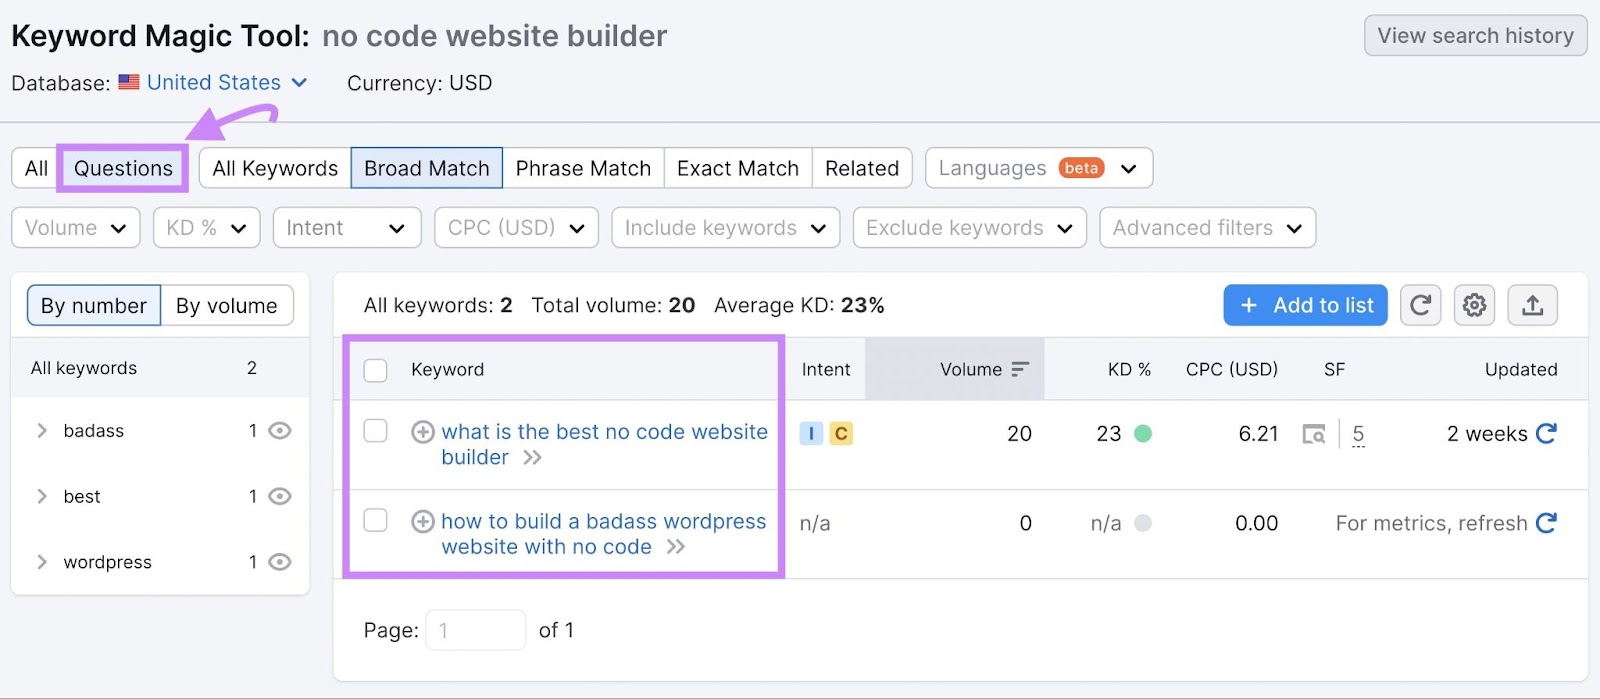 Keyword Magic Tool "Questions" results for "no code website builder"